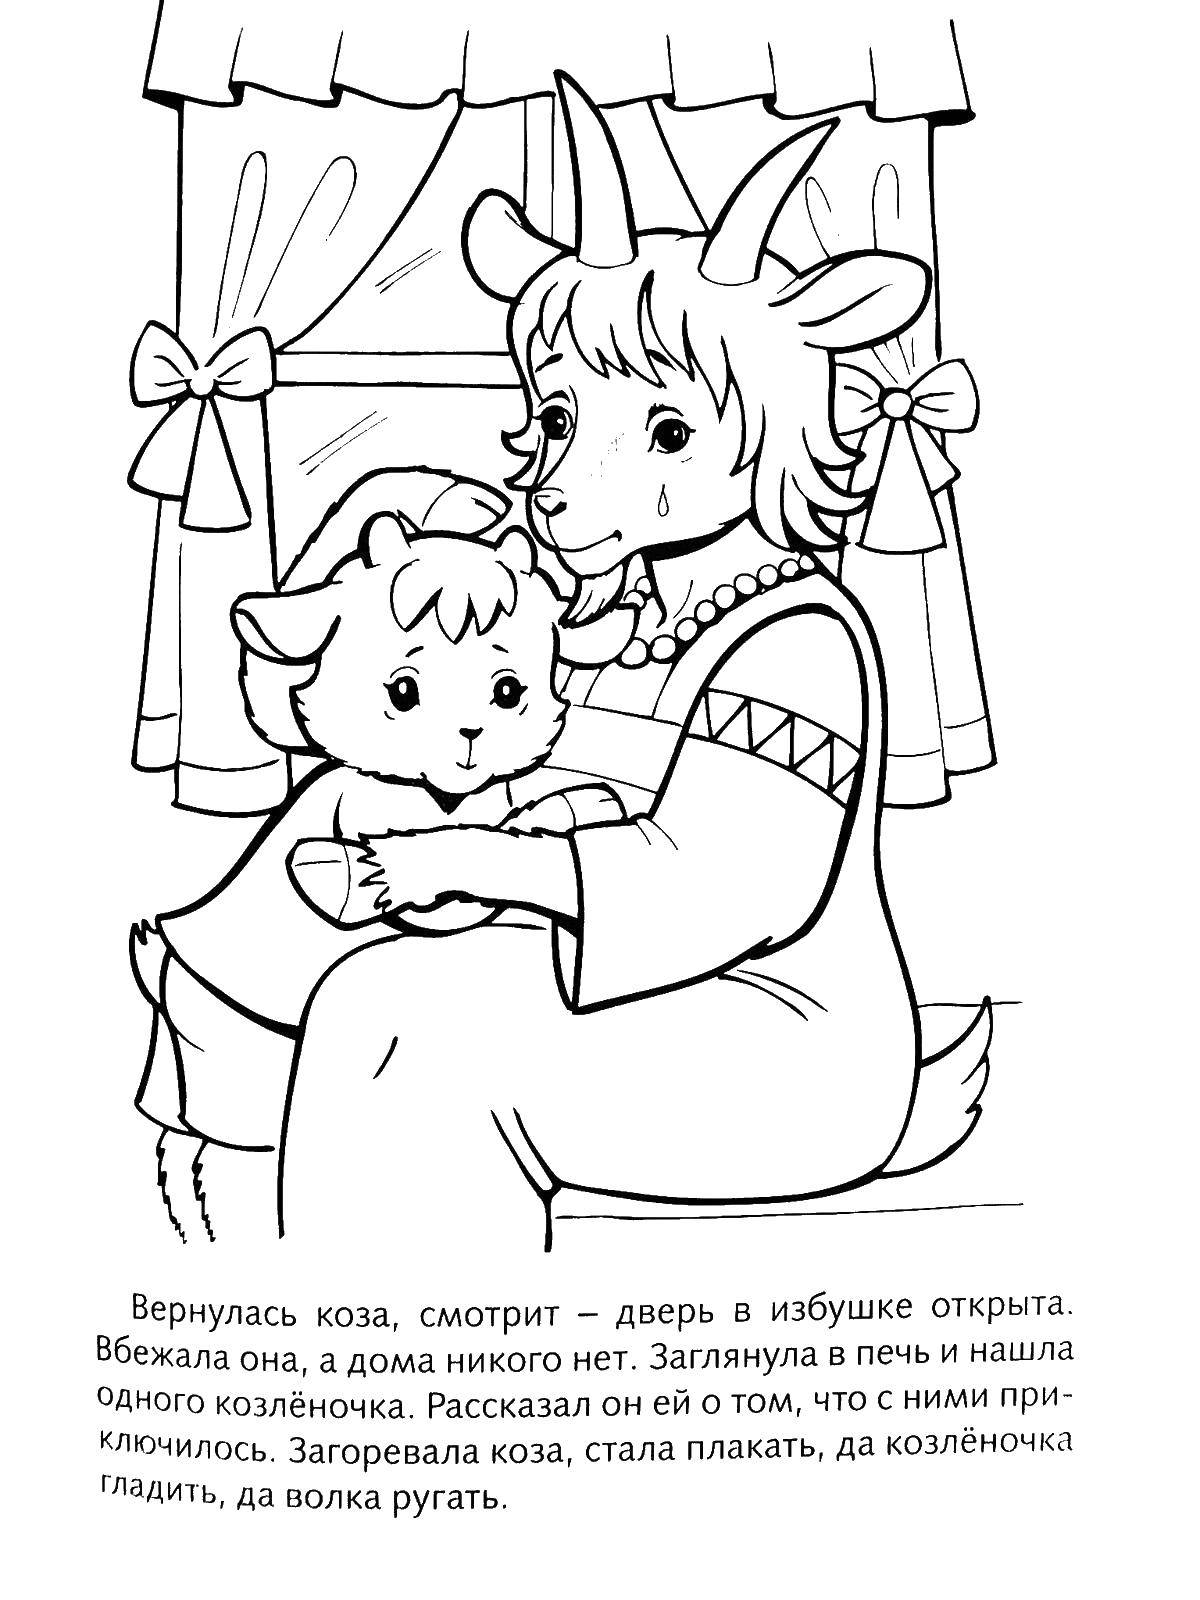 Coloring The goat and the goat. Category Fairy tales. Tags:  goat, goat.